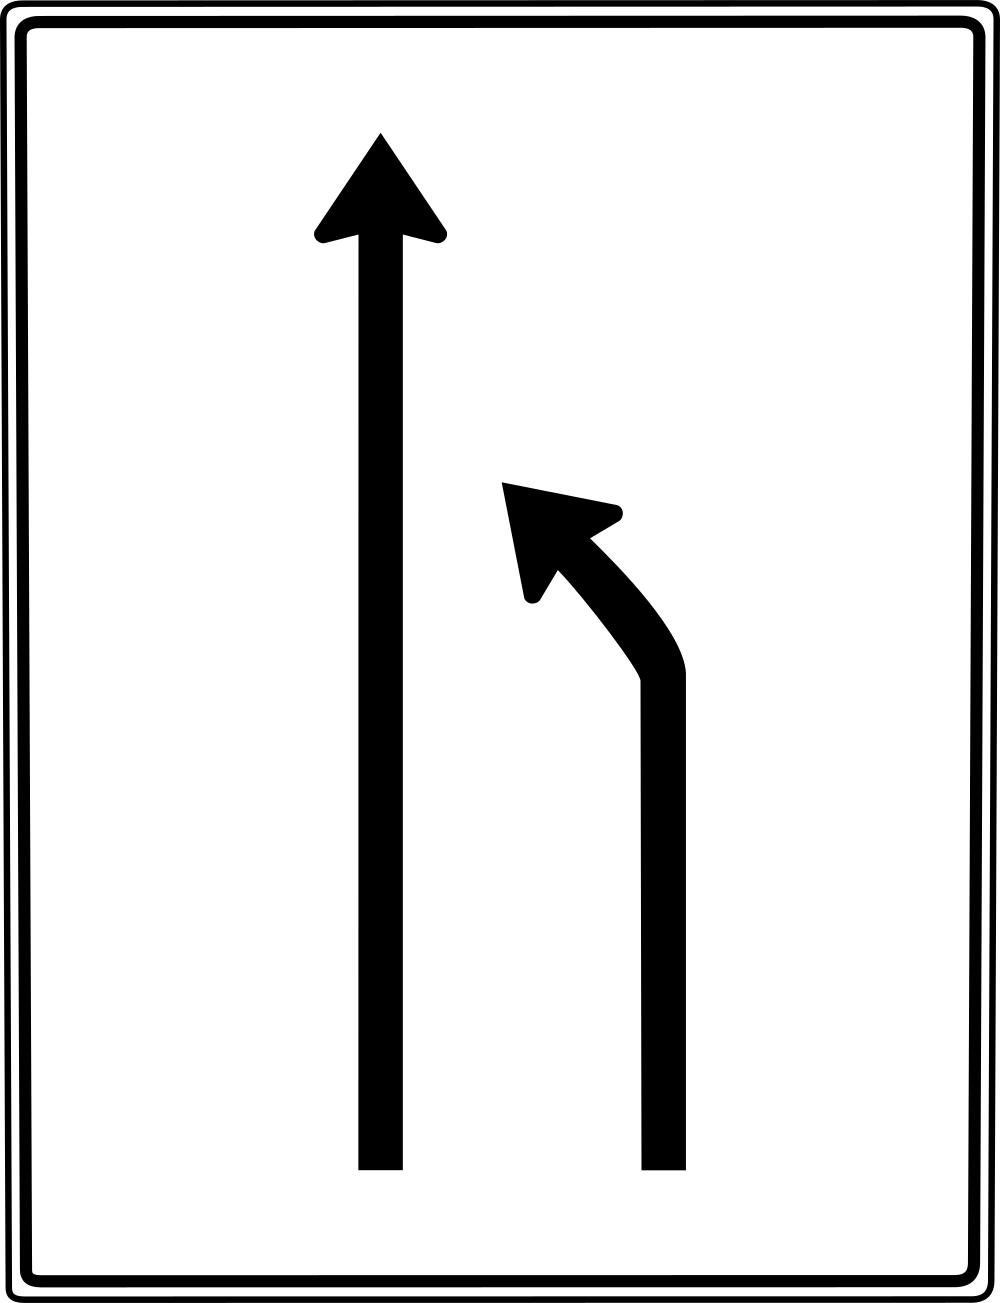 End of the lane for cyclists.